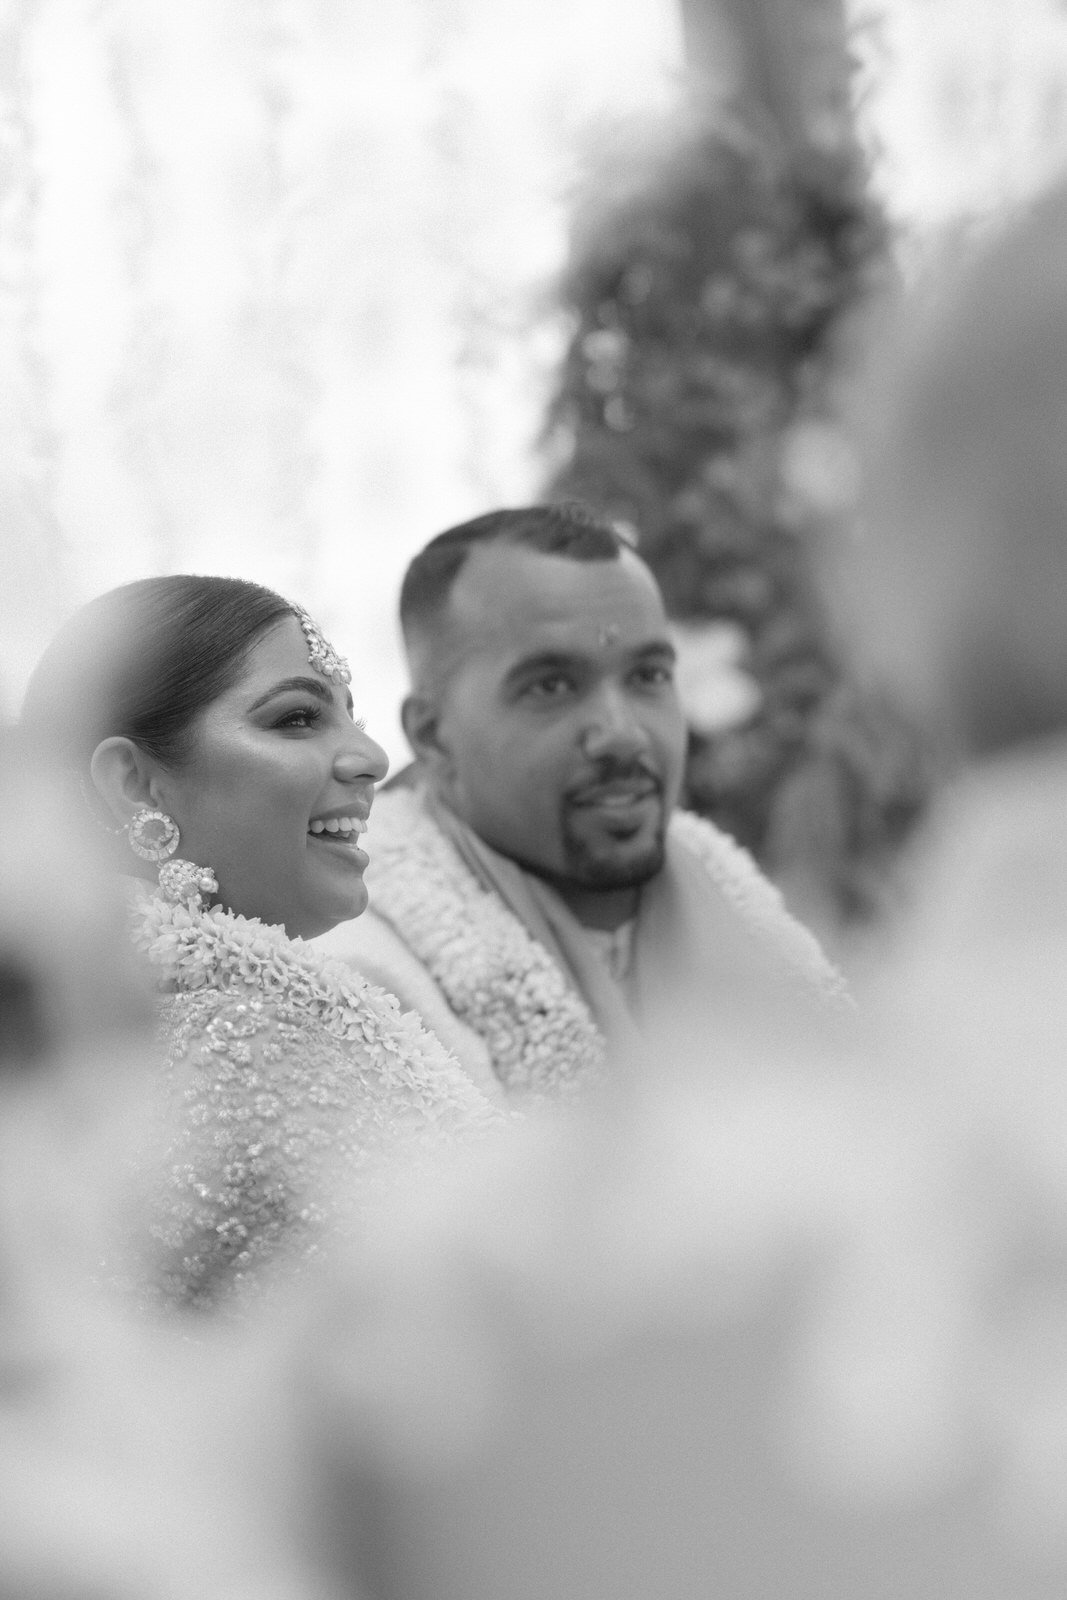 Luxury Indian Wedding in Miami Florida - Indian wedding photographer miami florida - michelle gonzalez photography - loews hotel in coral gables wedding-70.jpg